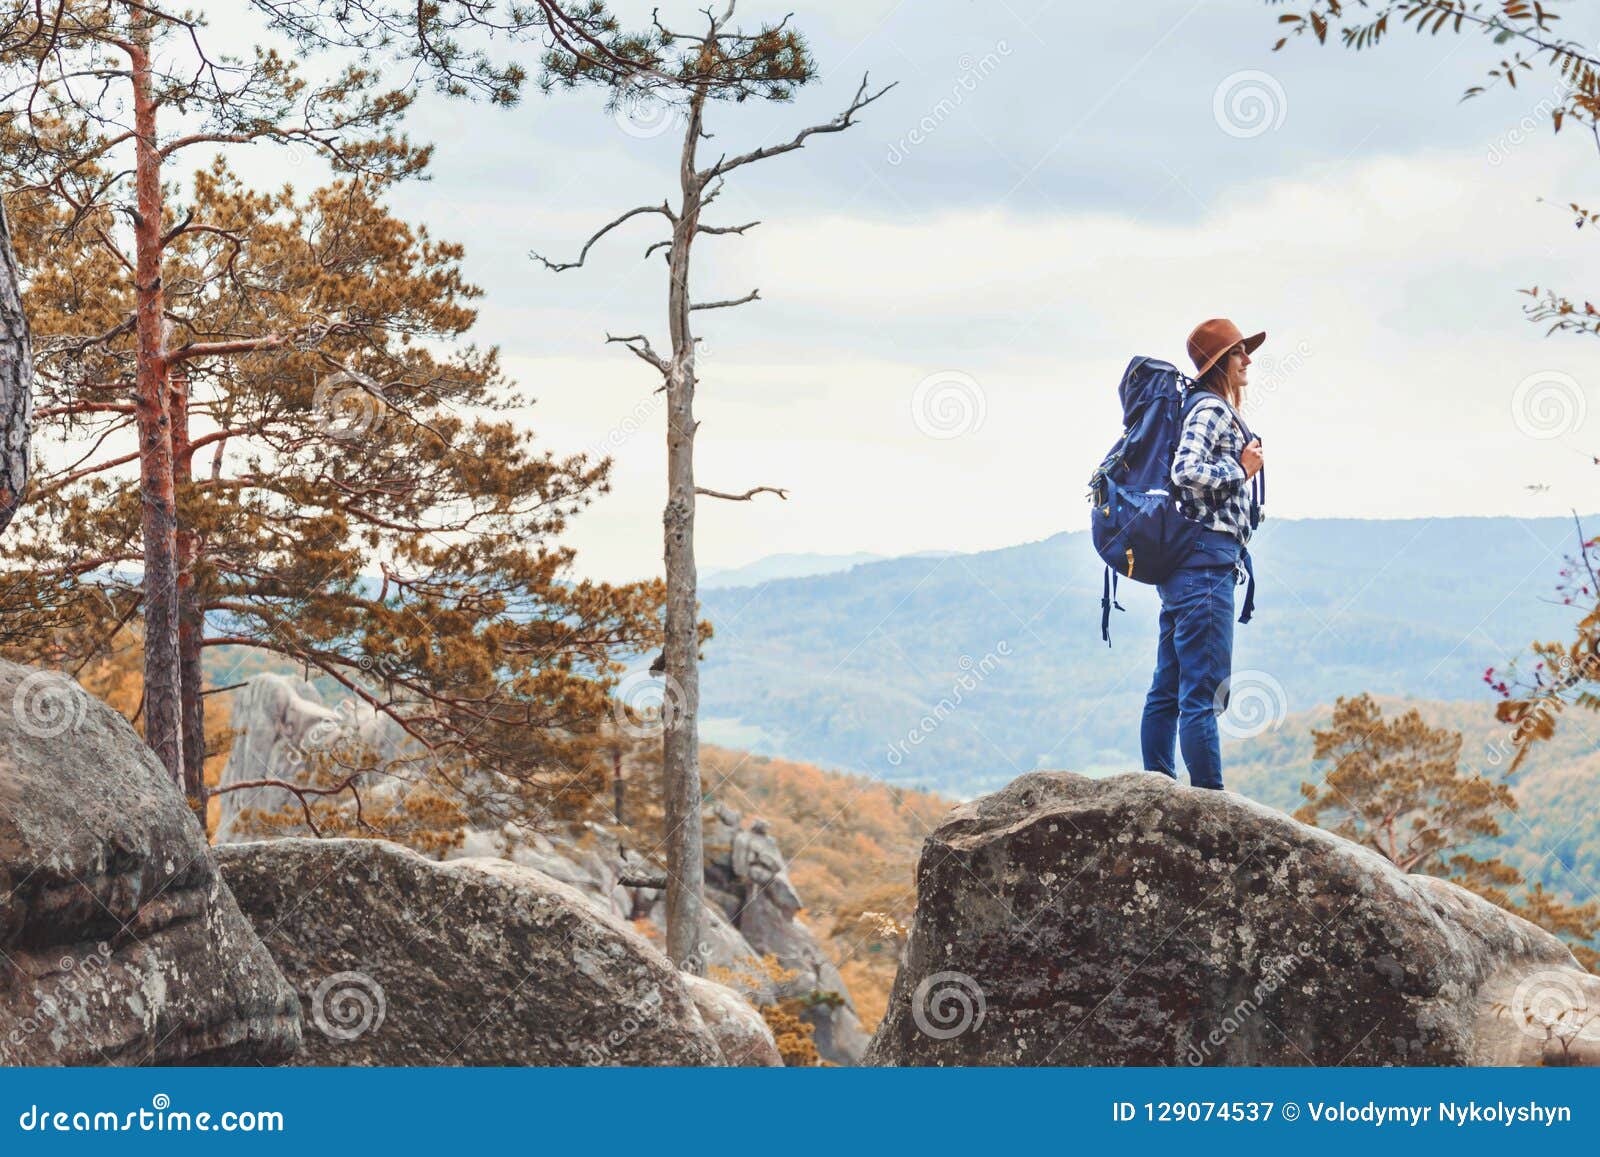 Young Travelling Woman Enjoying The Journey Stock Image ...